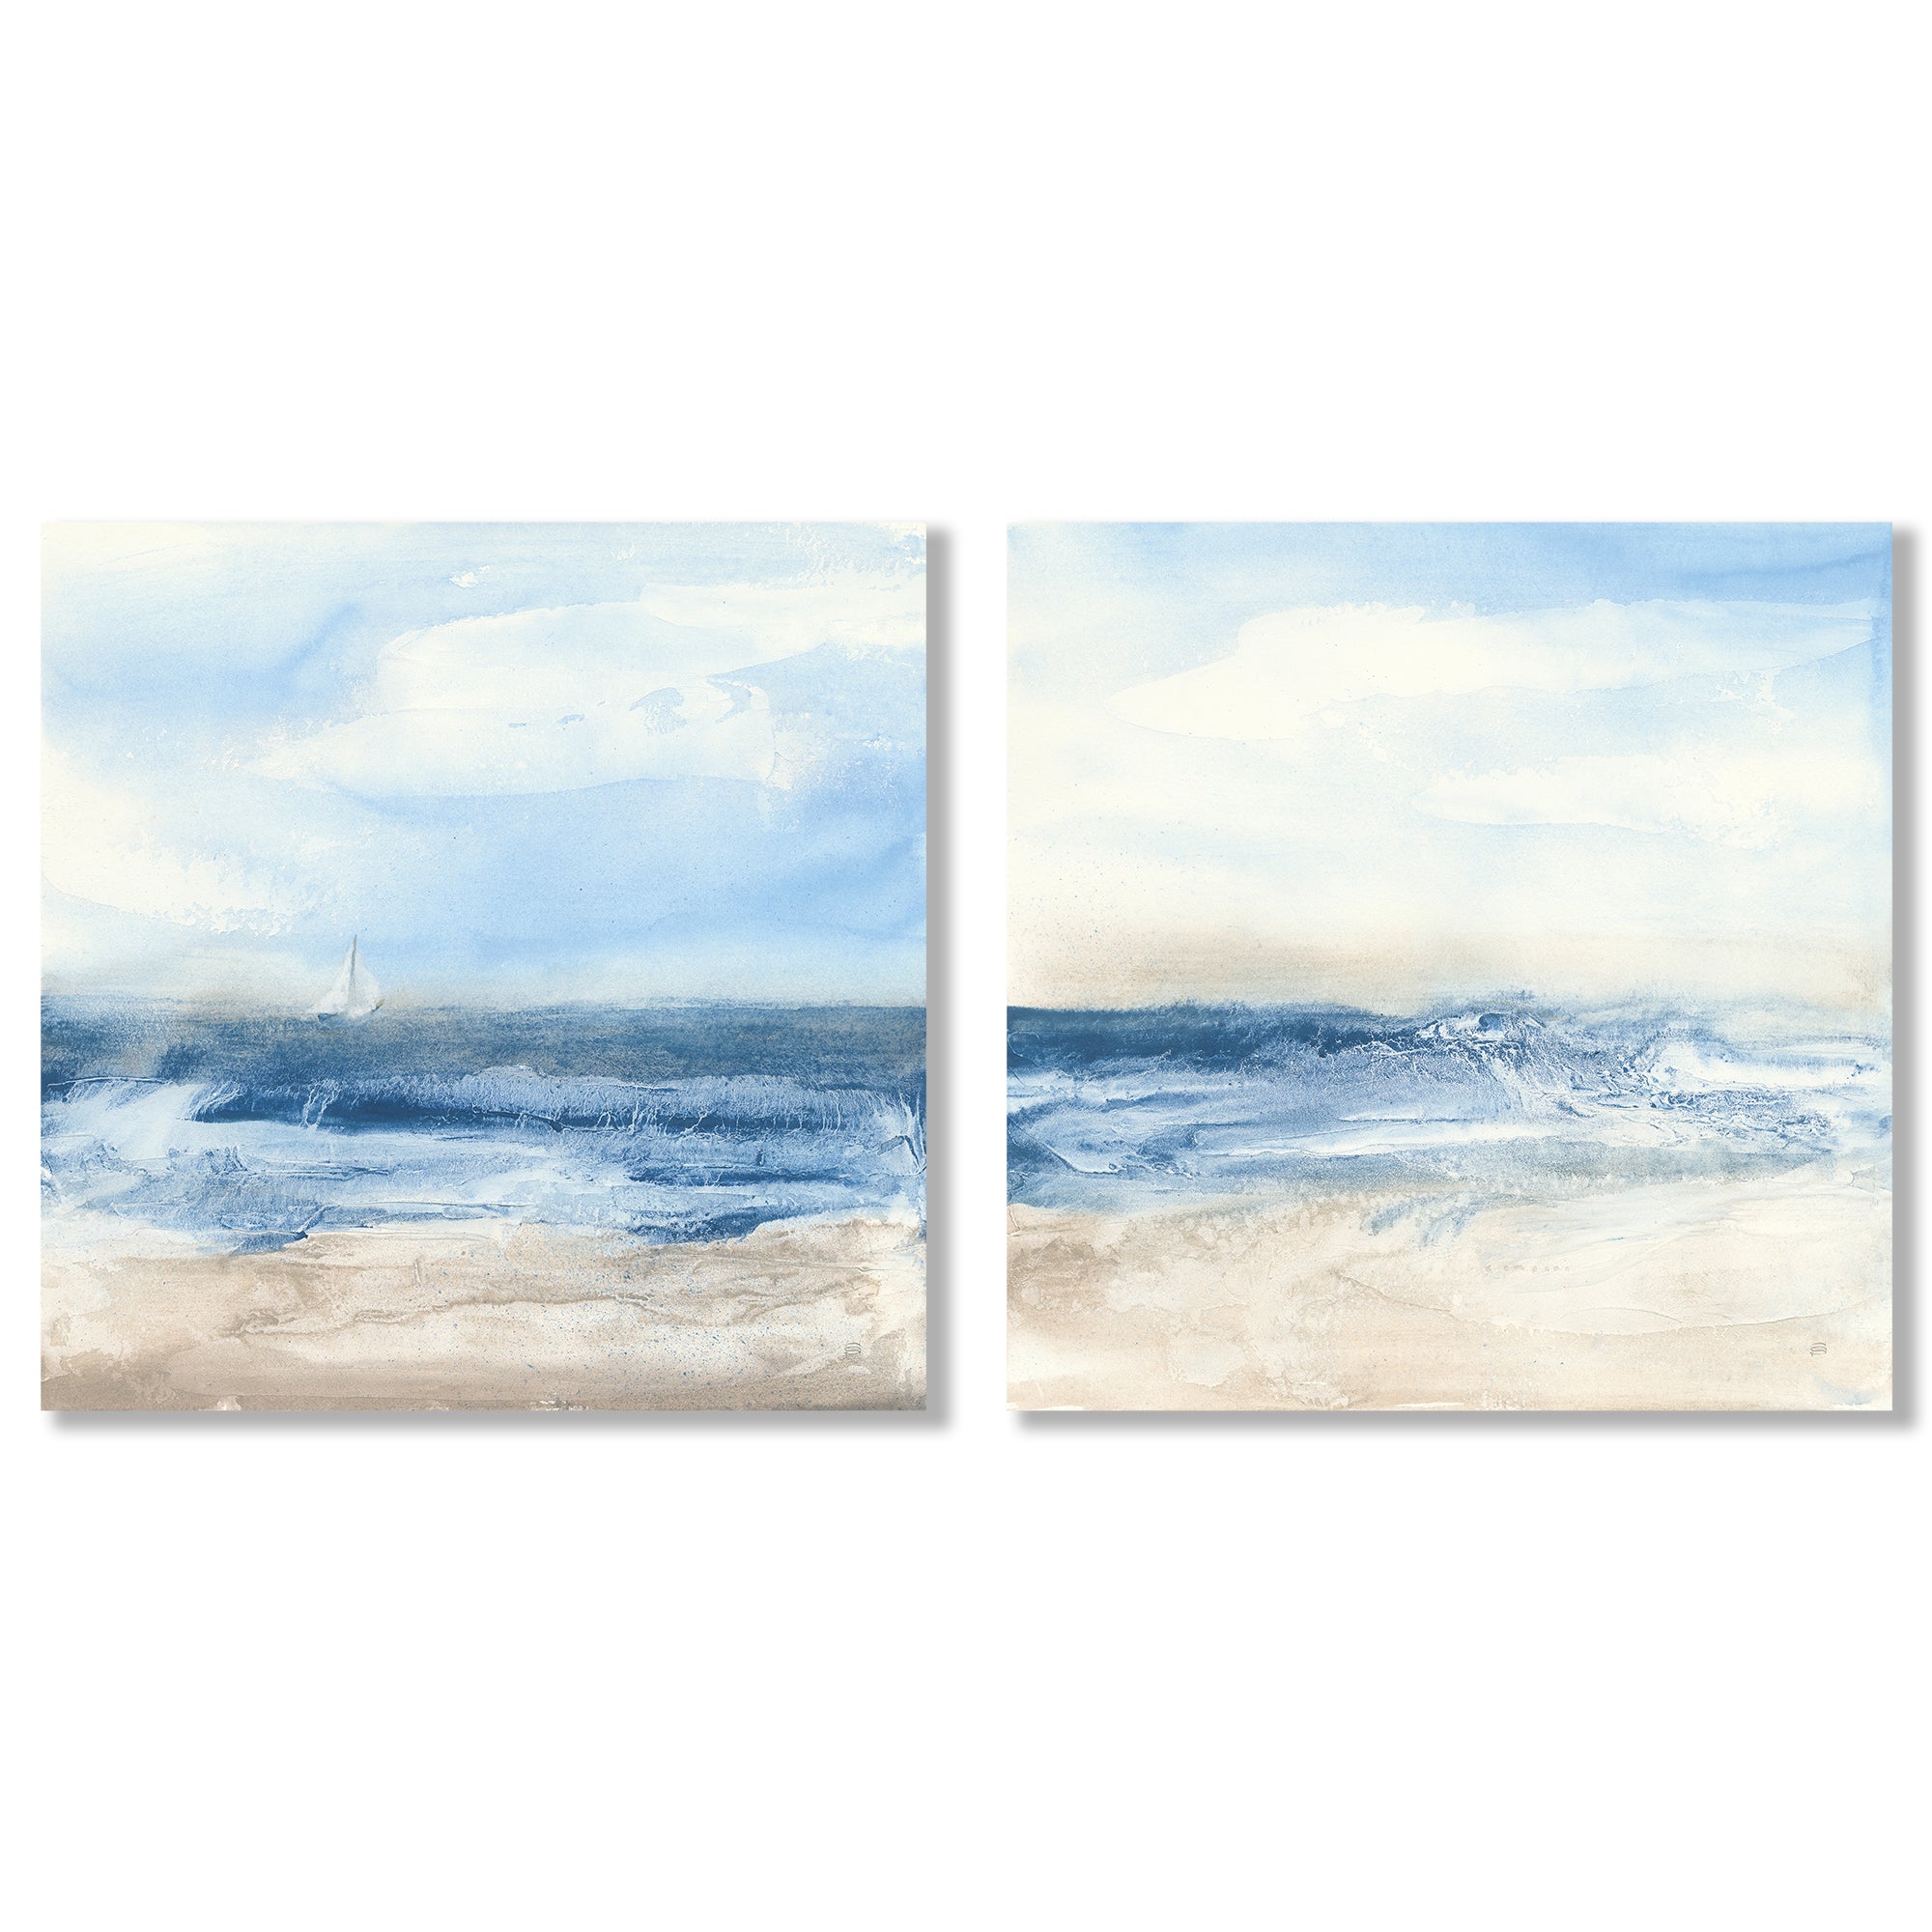 Surf and Sails - 2 Piece Gallery Wrapped Canvas Set by Chris Paschke - Art Set - Americanflat